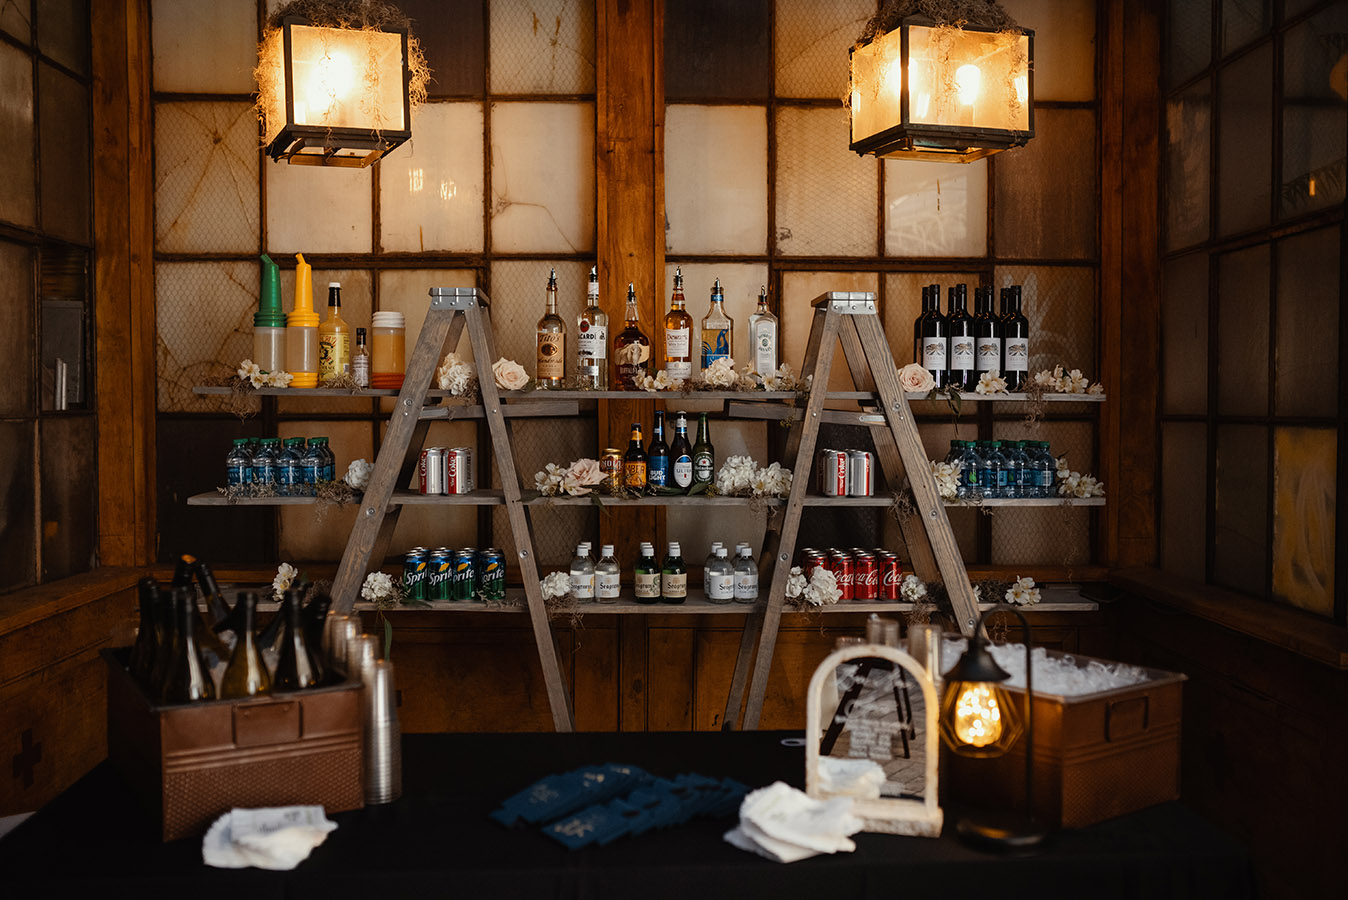 The ladder shelf bar back was custom created for Jeanne and Dan's wedding by True Value Rental. Abita and NOLA Blonde beers were displayed in a pirogue. Photo by Dark Roux